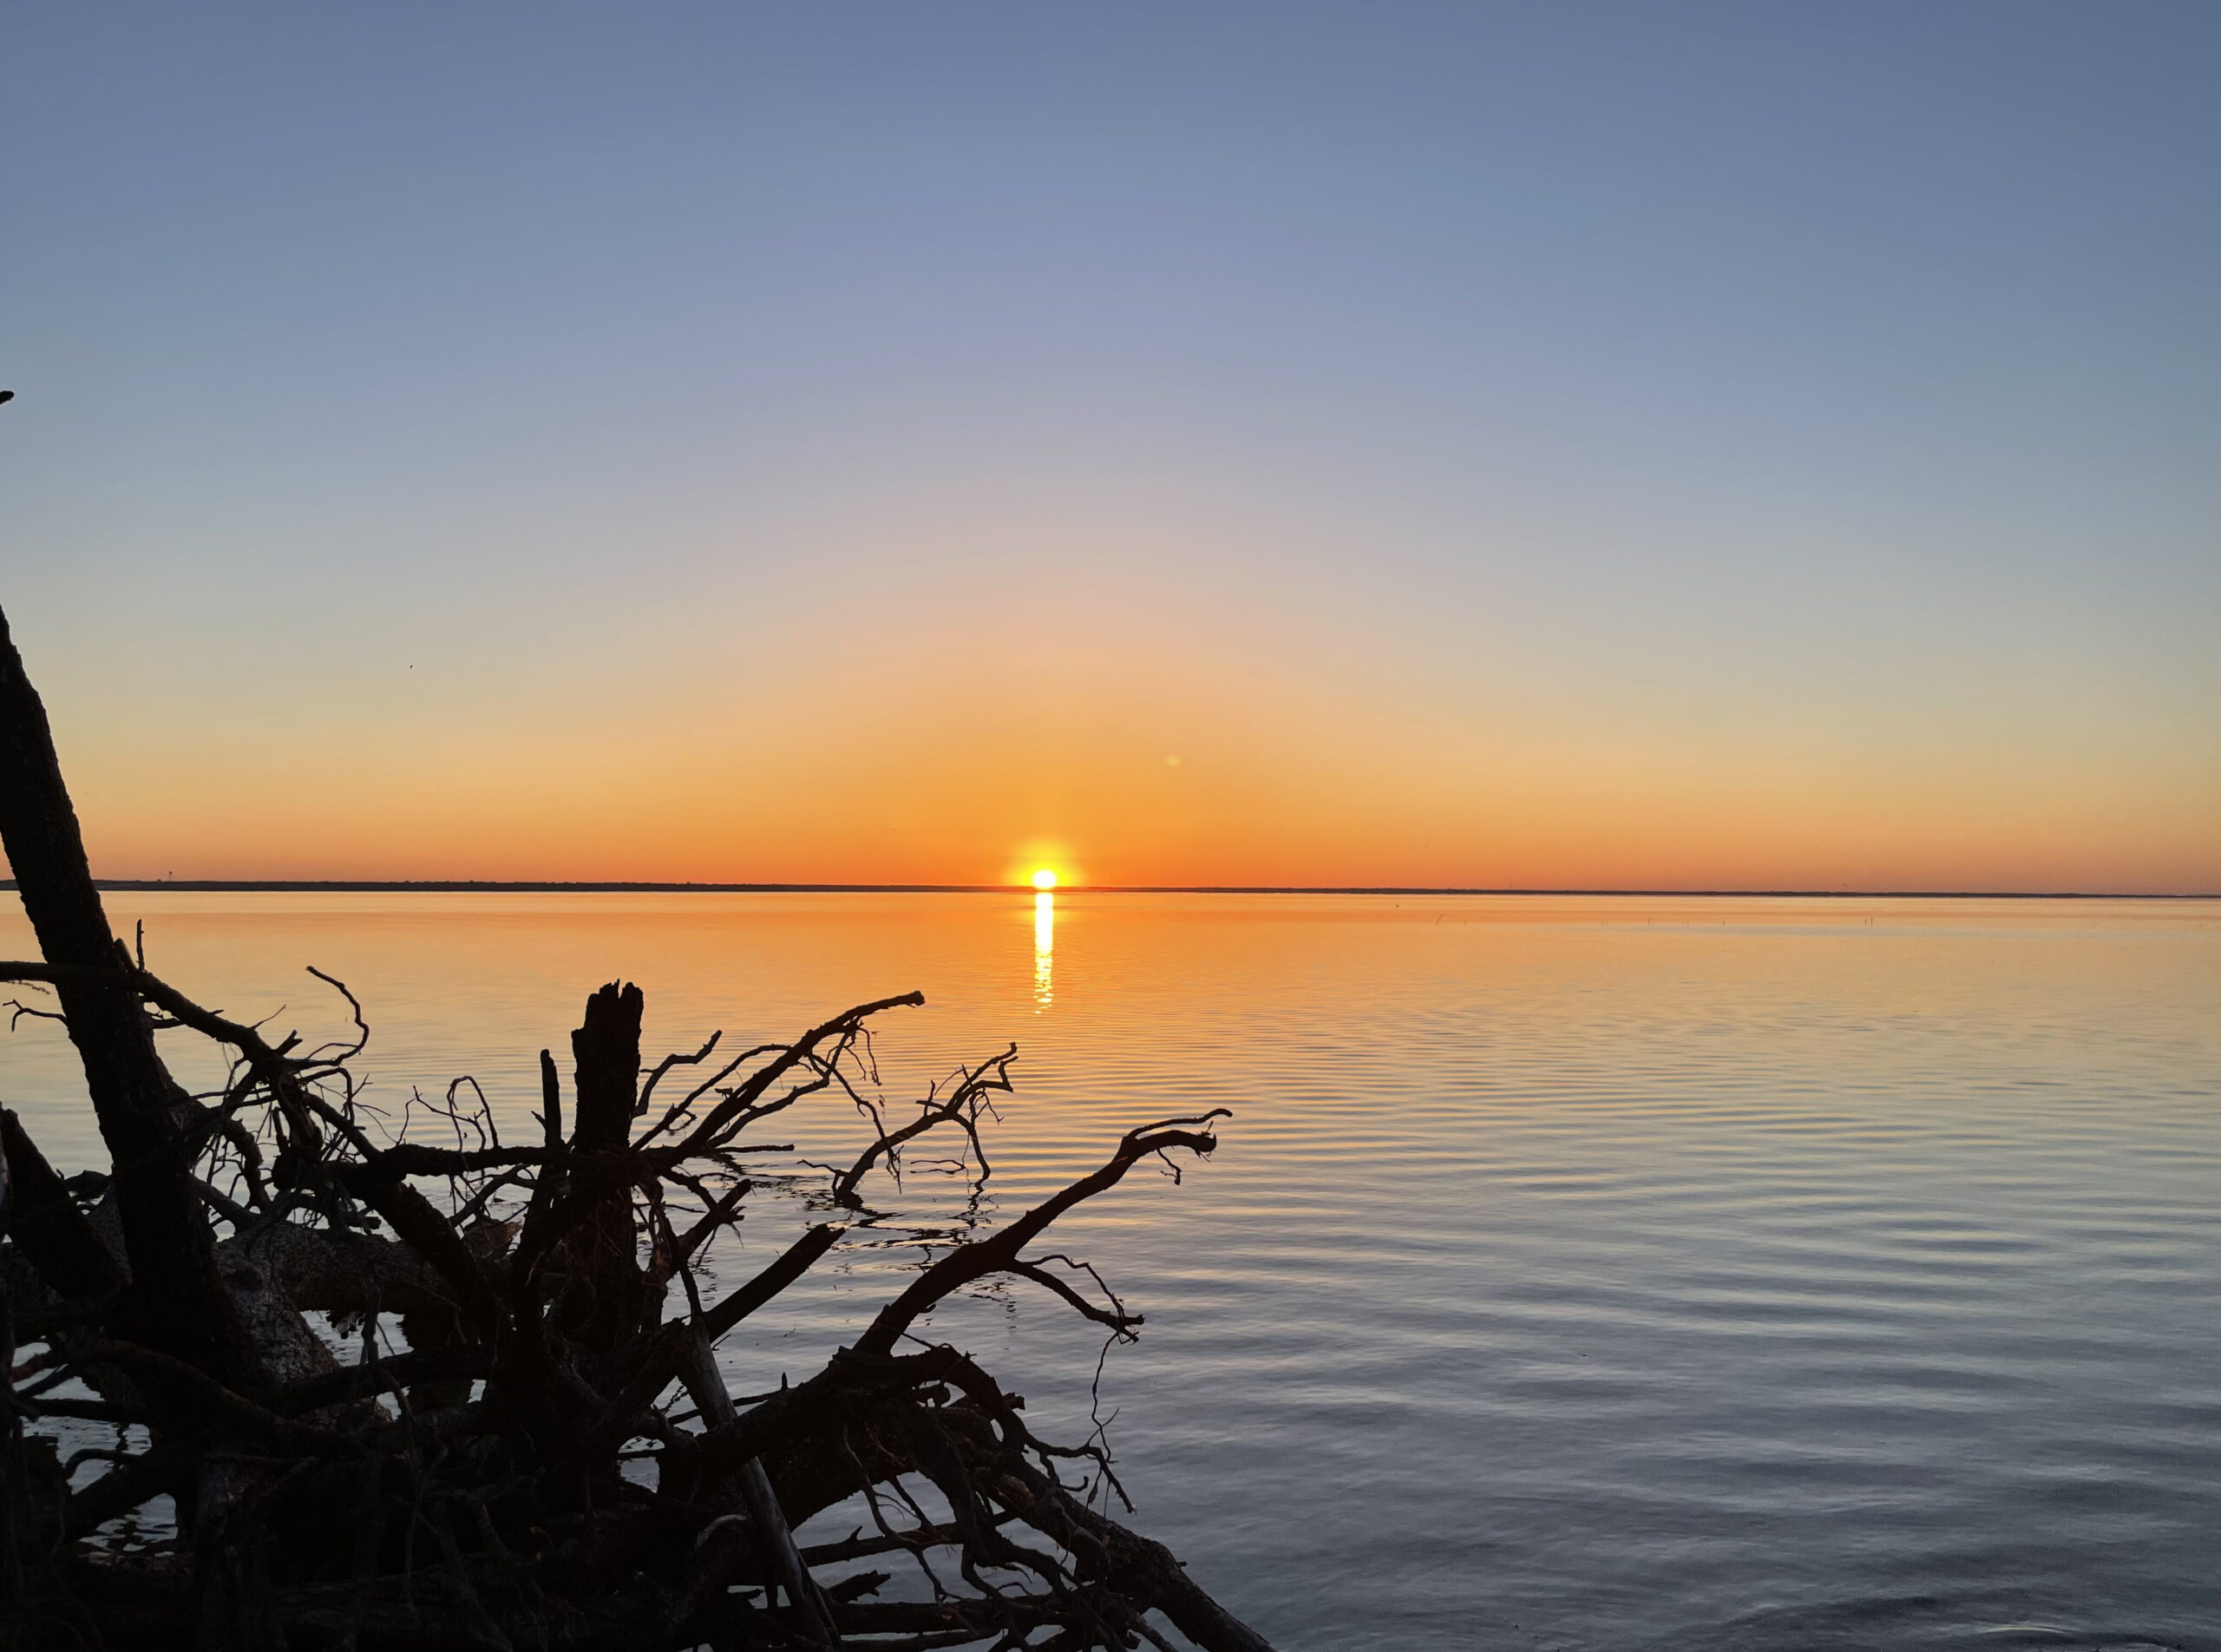 A bright yellow sun peaks over the horizon and casts bright yellow strip onto the water. A thin strip of land separates the sky from the water. Both are bright orange fading to yellow and then blue differing only by a slight ripple on the water. Nearby several limbs from dead bushes and trees extend above the water.